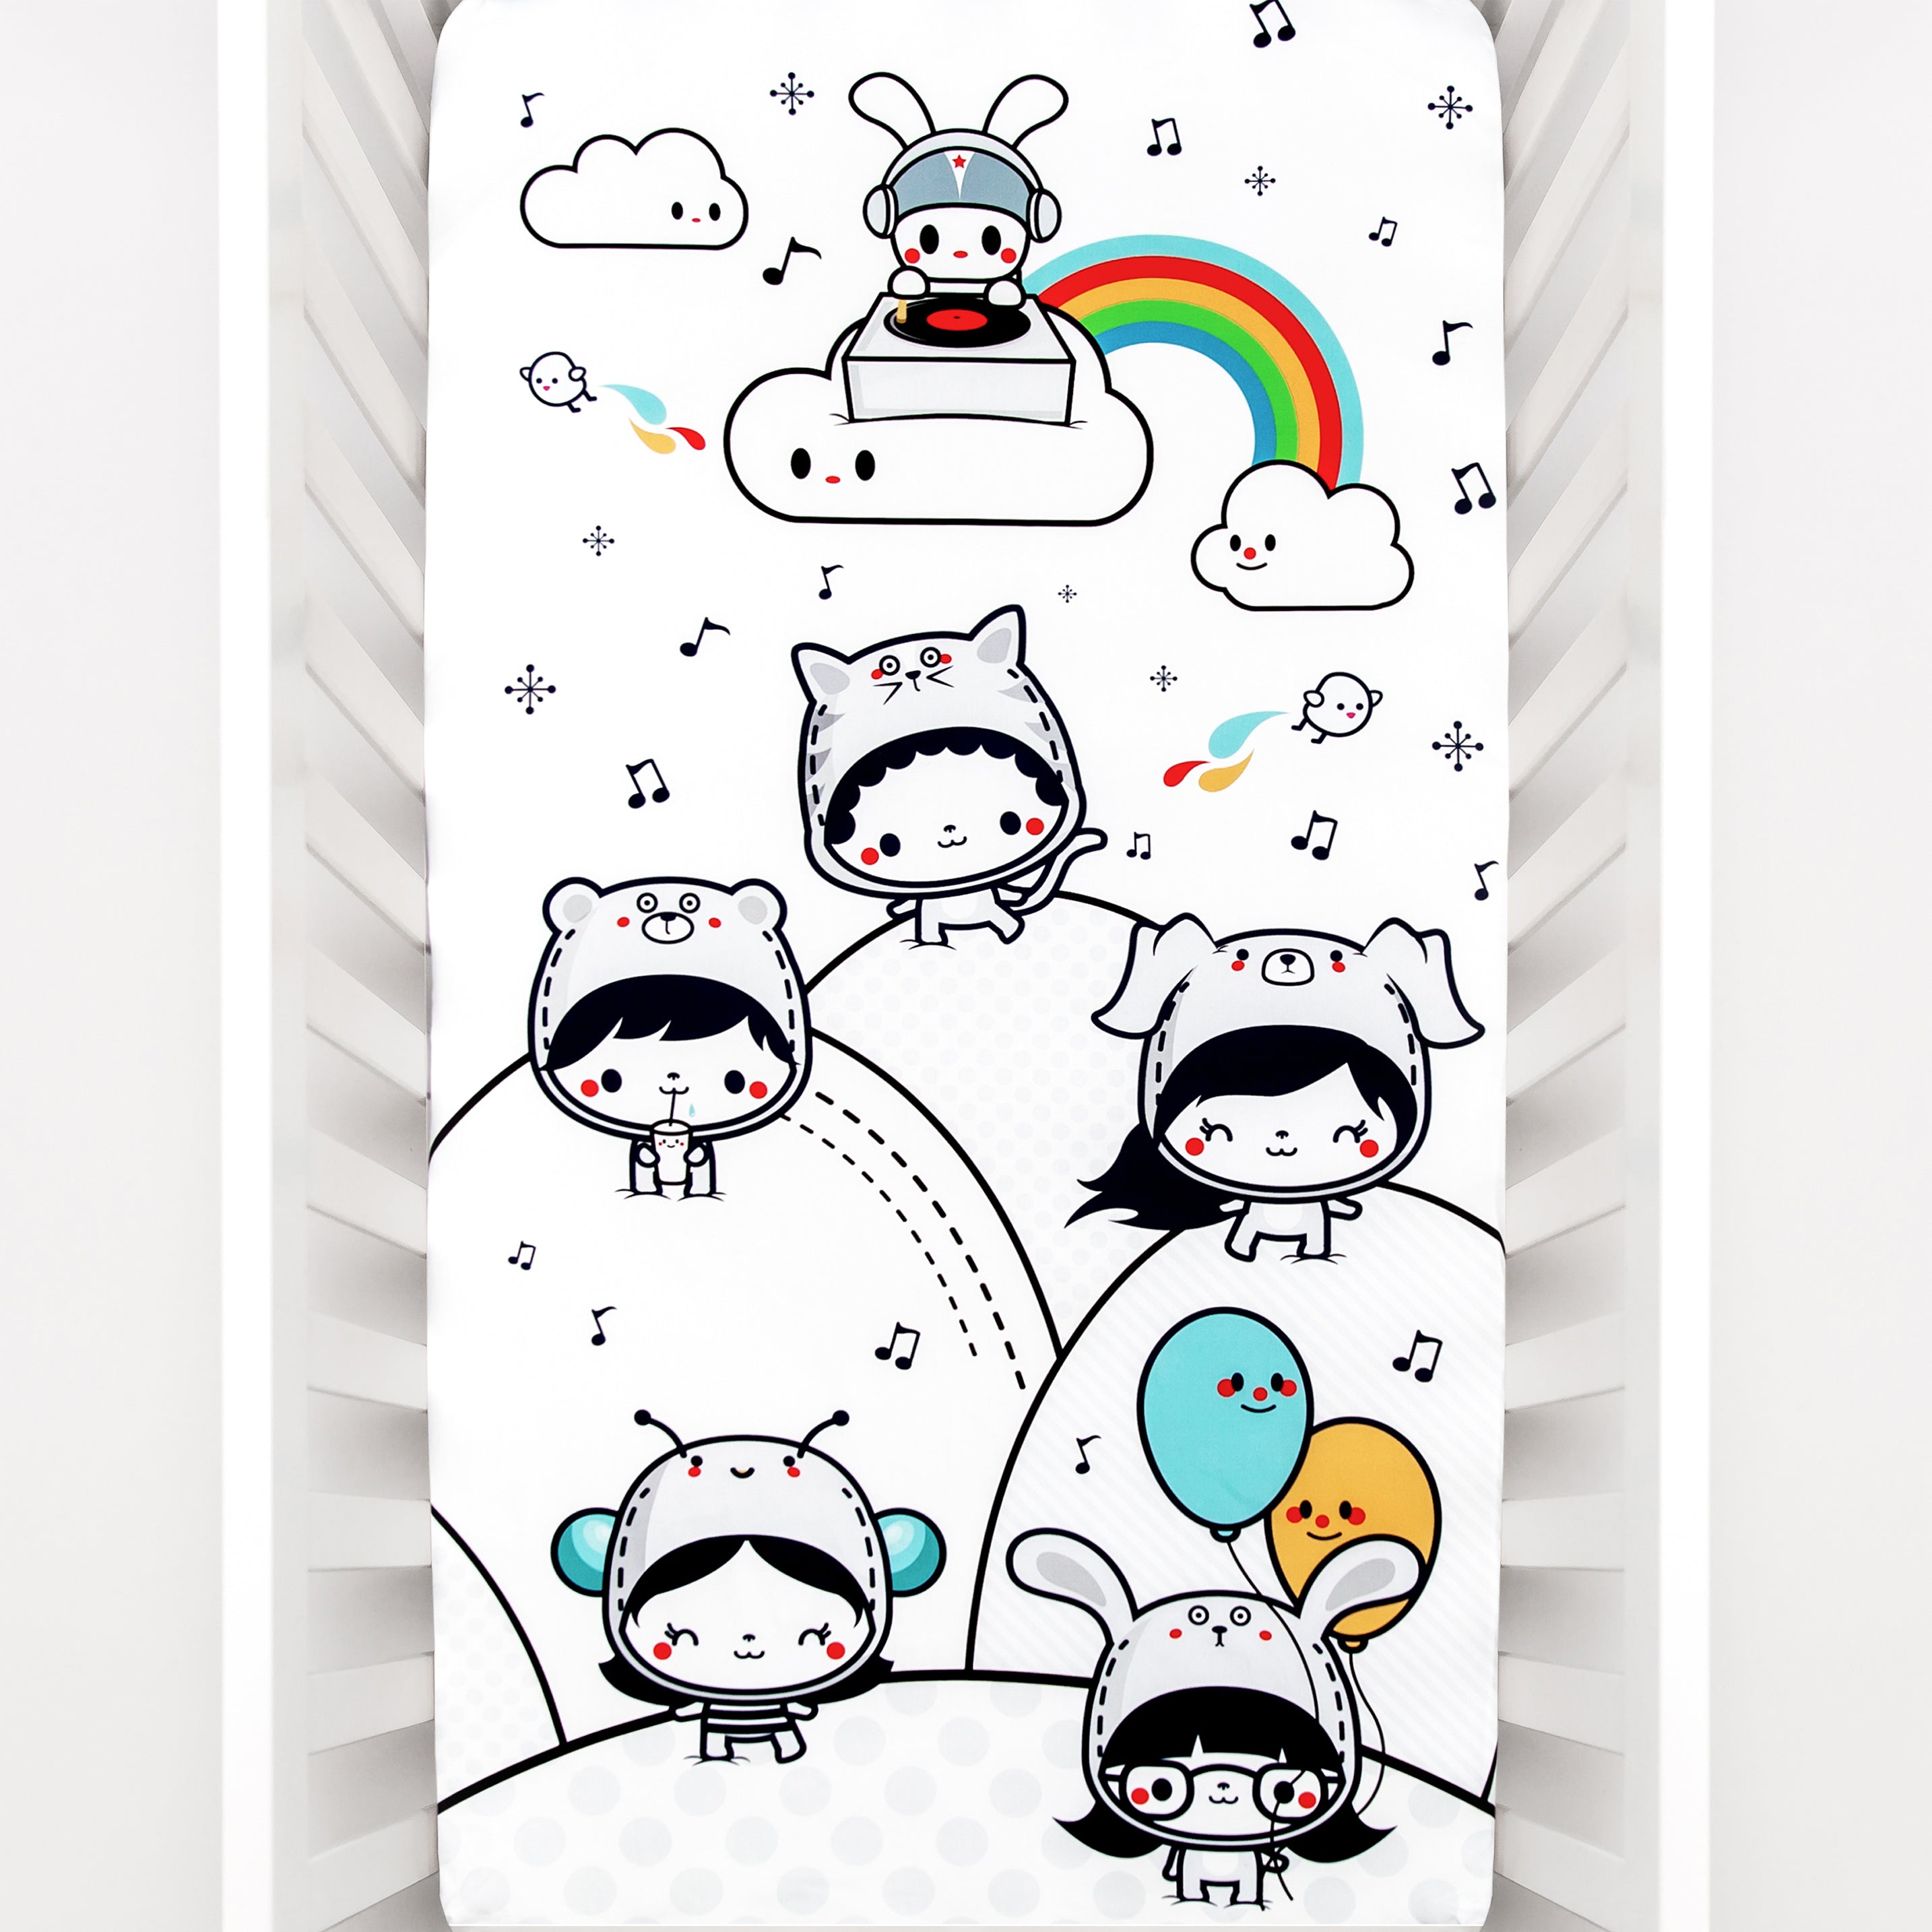 Fitted baby crib sheet by Rookie Humans, Party In My Crib, rainbow baby crib sheet. Illustrated by Elisa Sassi. Designed for the modern nursery, packaged to make a unique baby shower gift. Party DJ theme, balloons, music nursery theme, kawaii illustration.